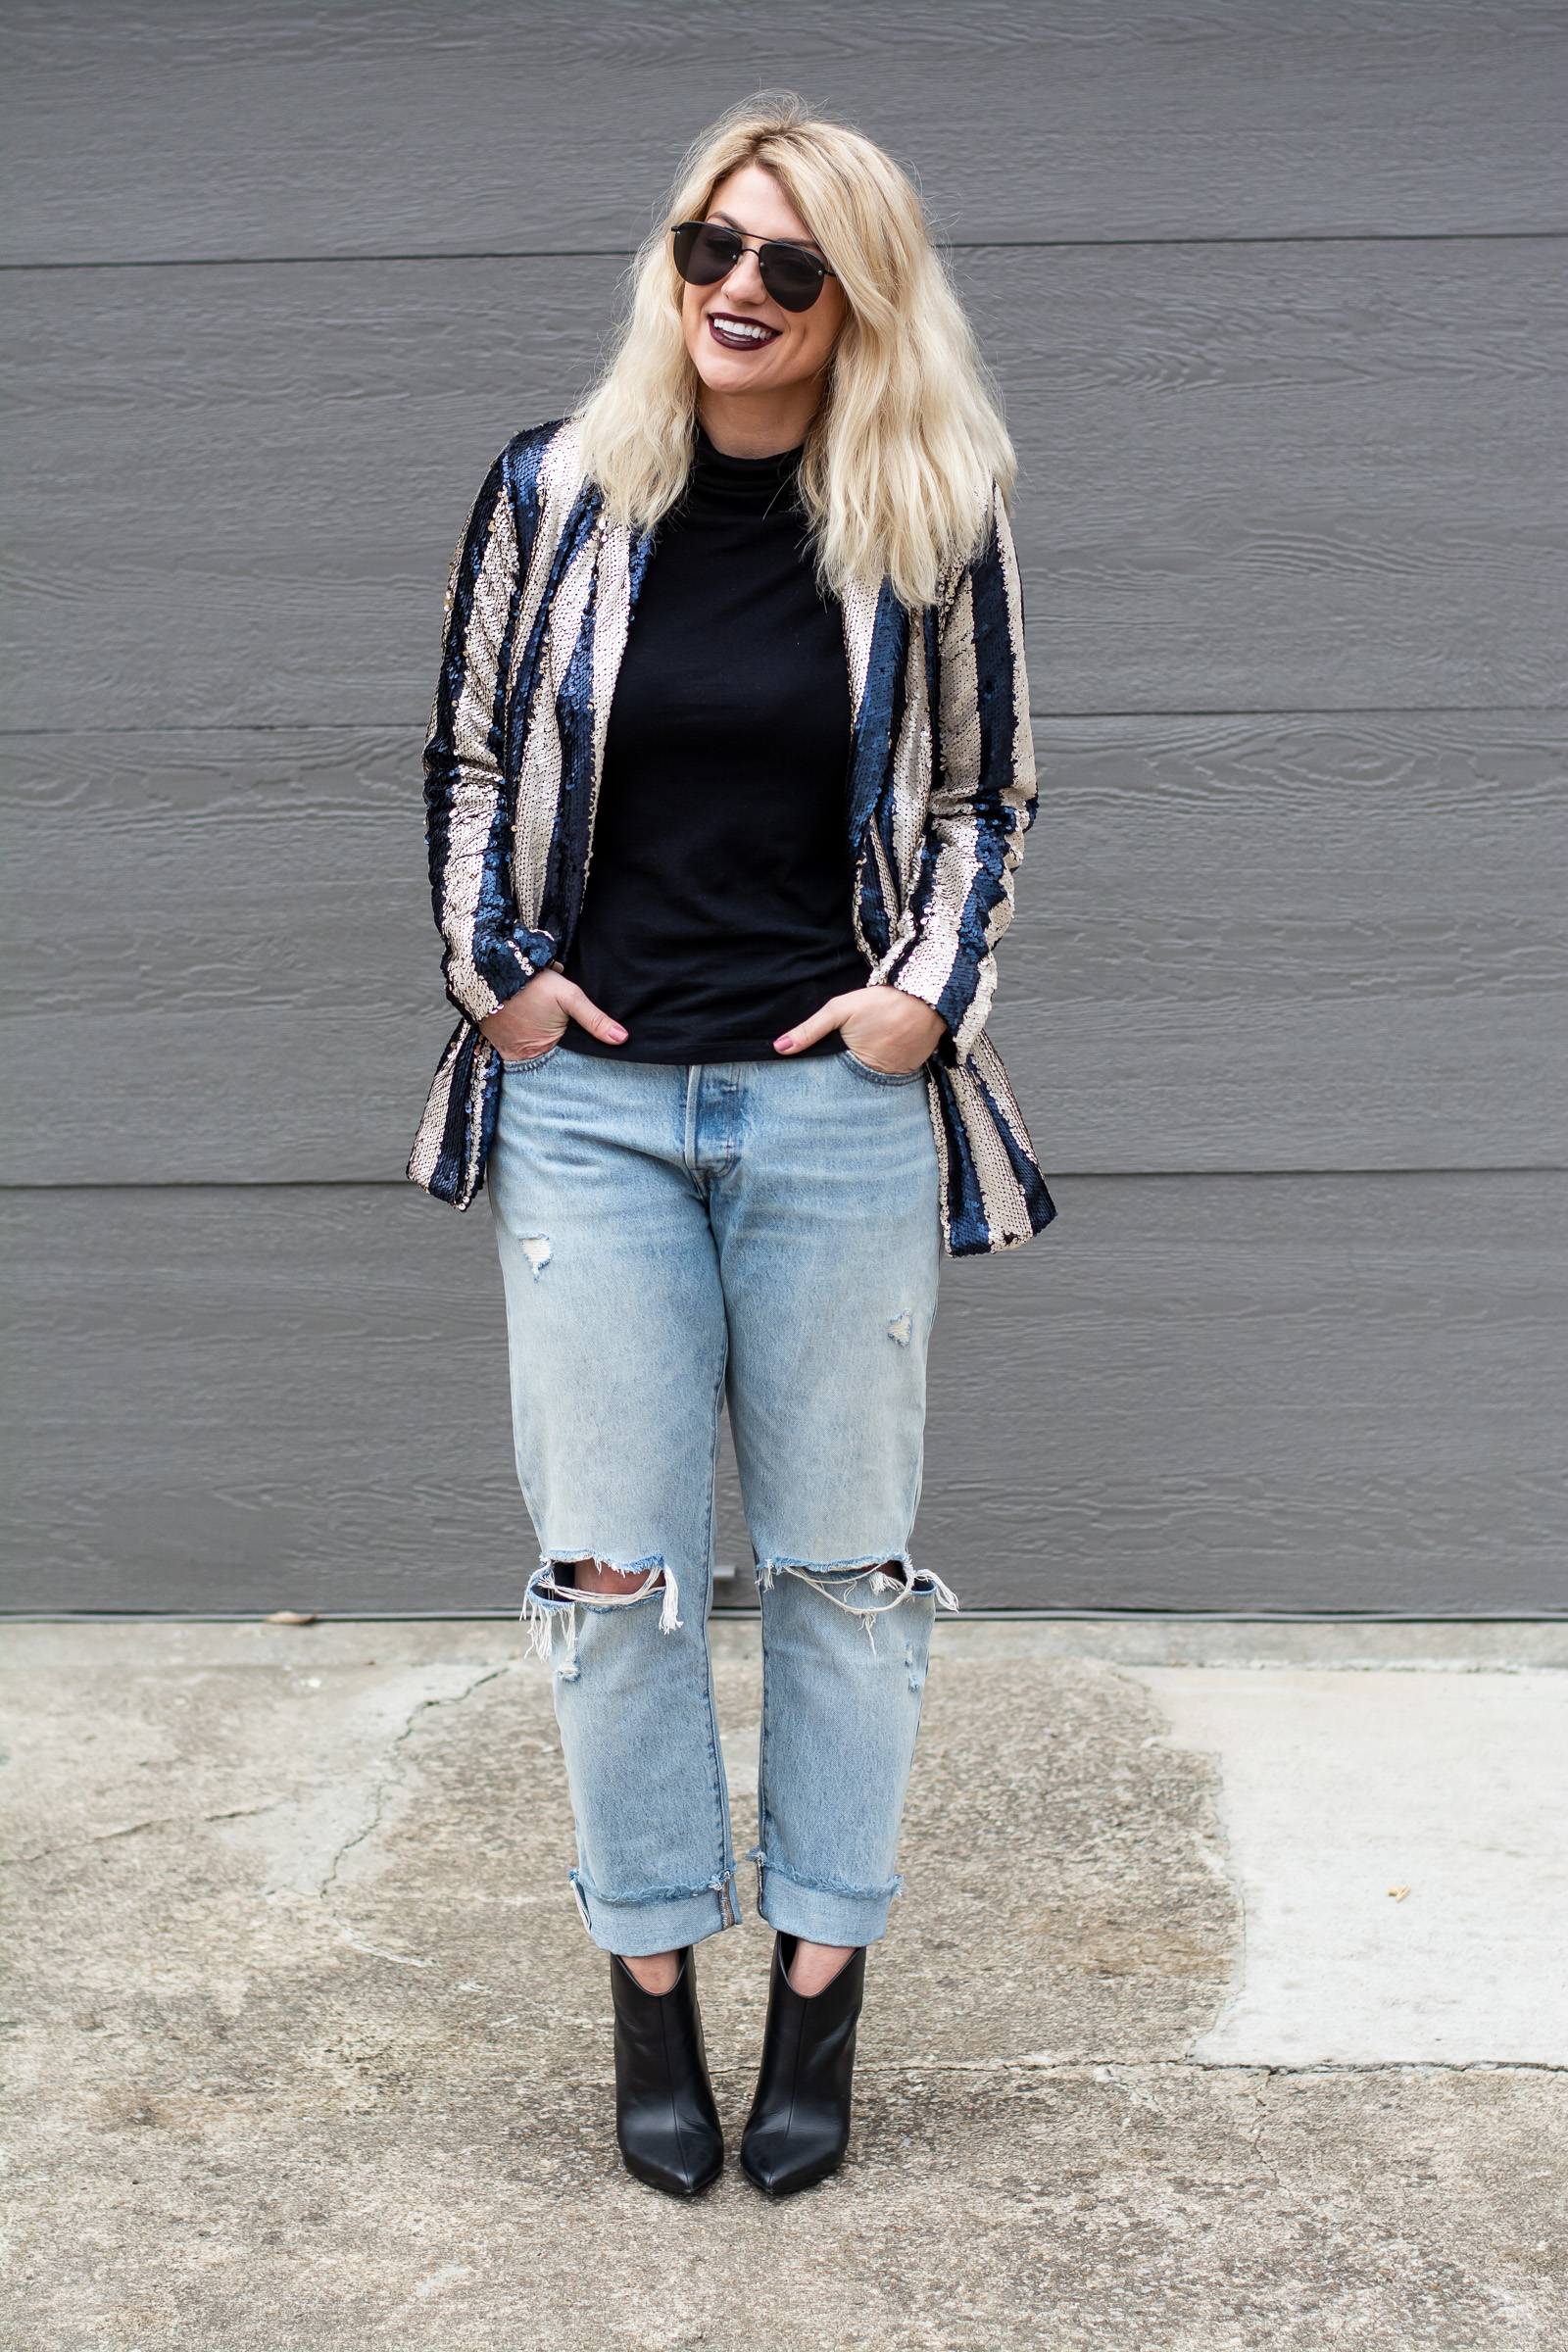 Striped Sequined Blazer for Day. | Ash from LSR